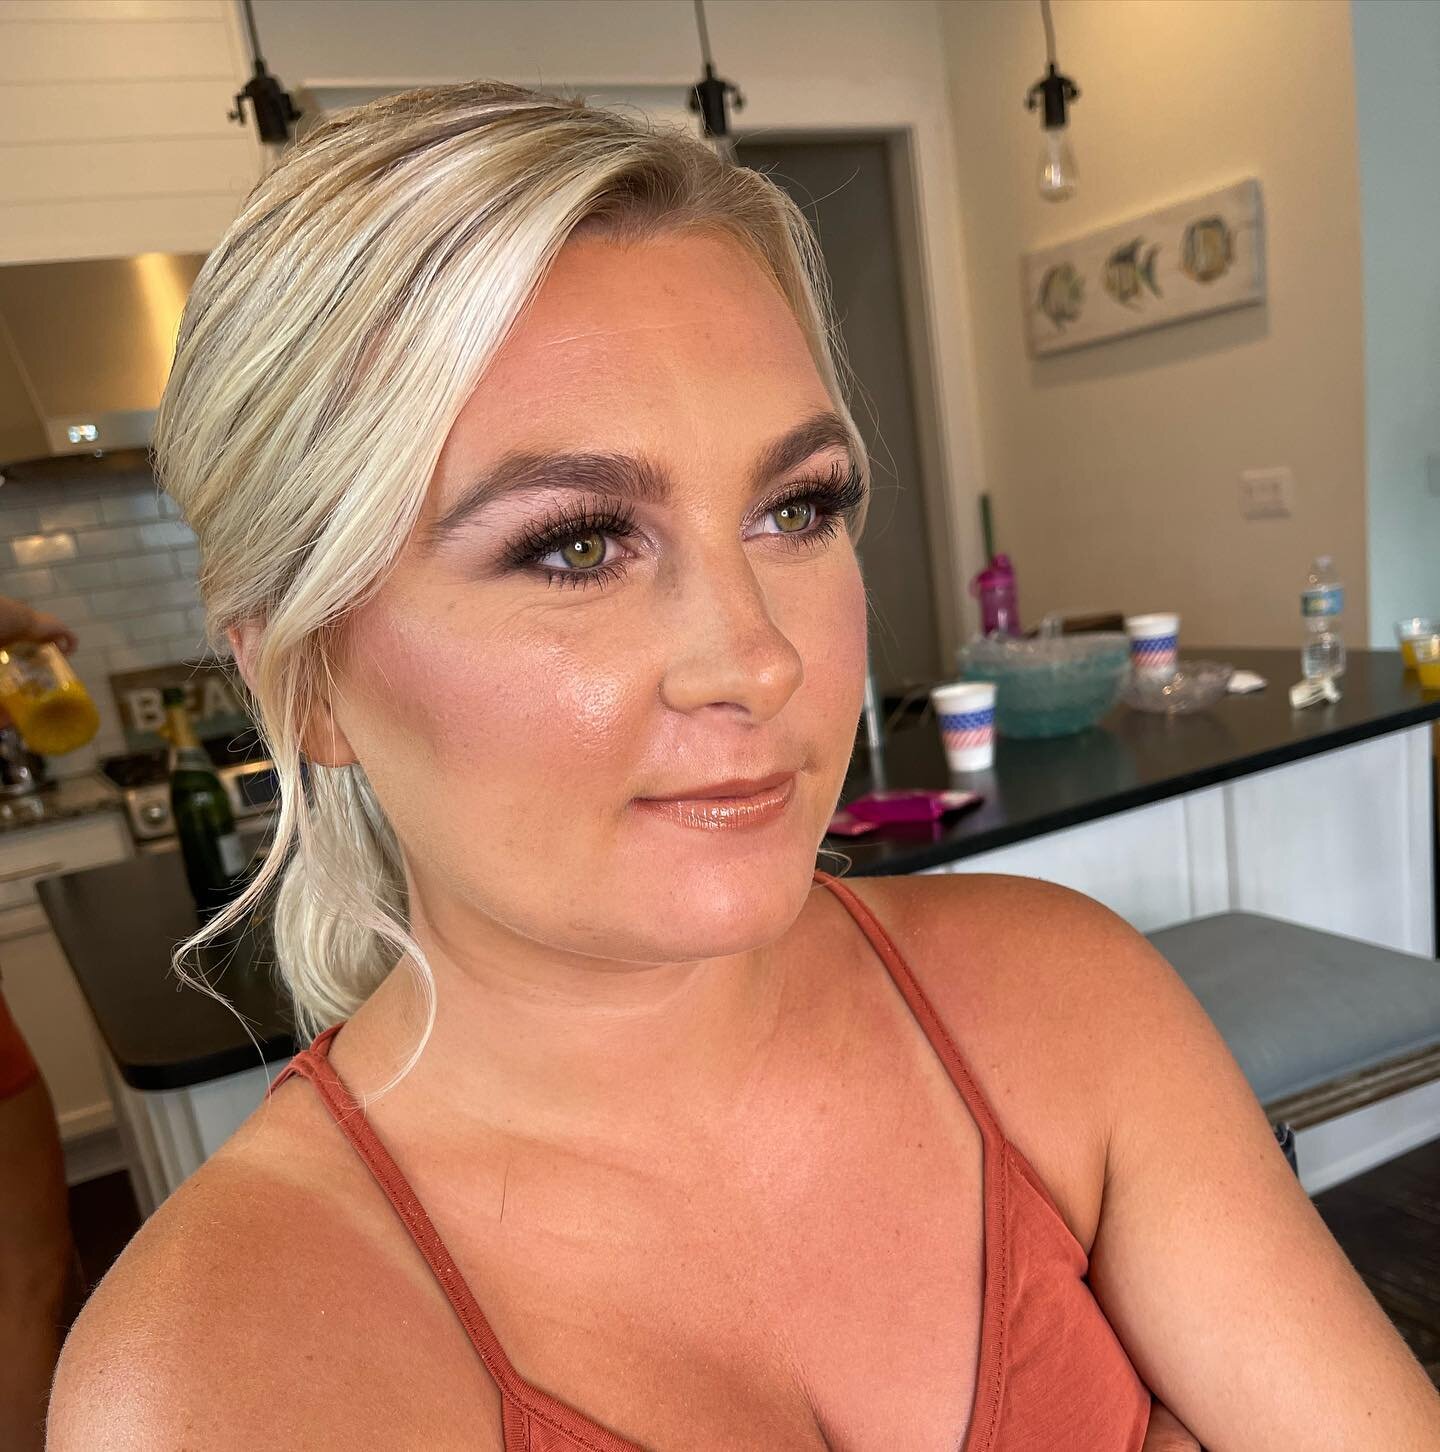 All the pink,bronze &amp; champagne tones for our gorg bridesbabe! I love how these tones bring out the yellow and green in her eyes ✨
&bull;
&bull;
&bull;
#topknotartistry #onsitehairandmakeup #bridesbabes #bridesmaidhair #bridesmaidmakeup #weddingm